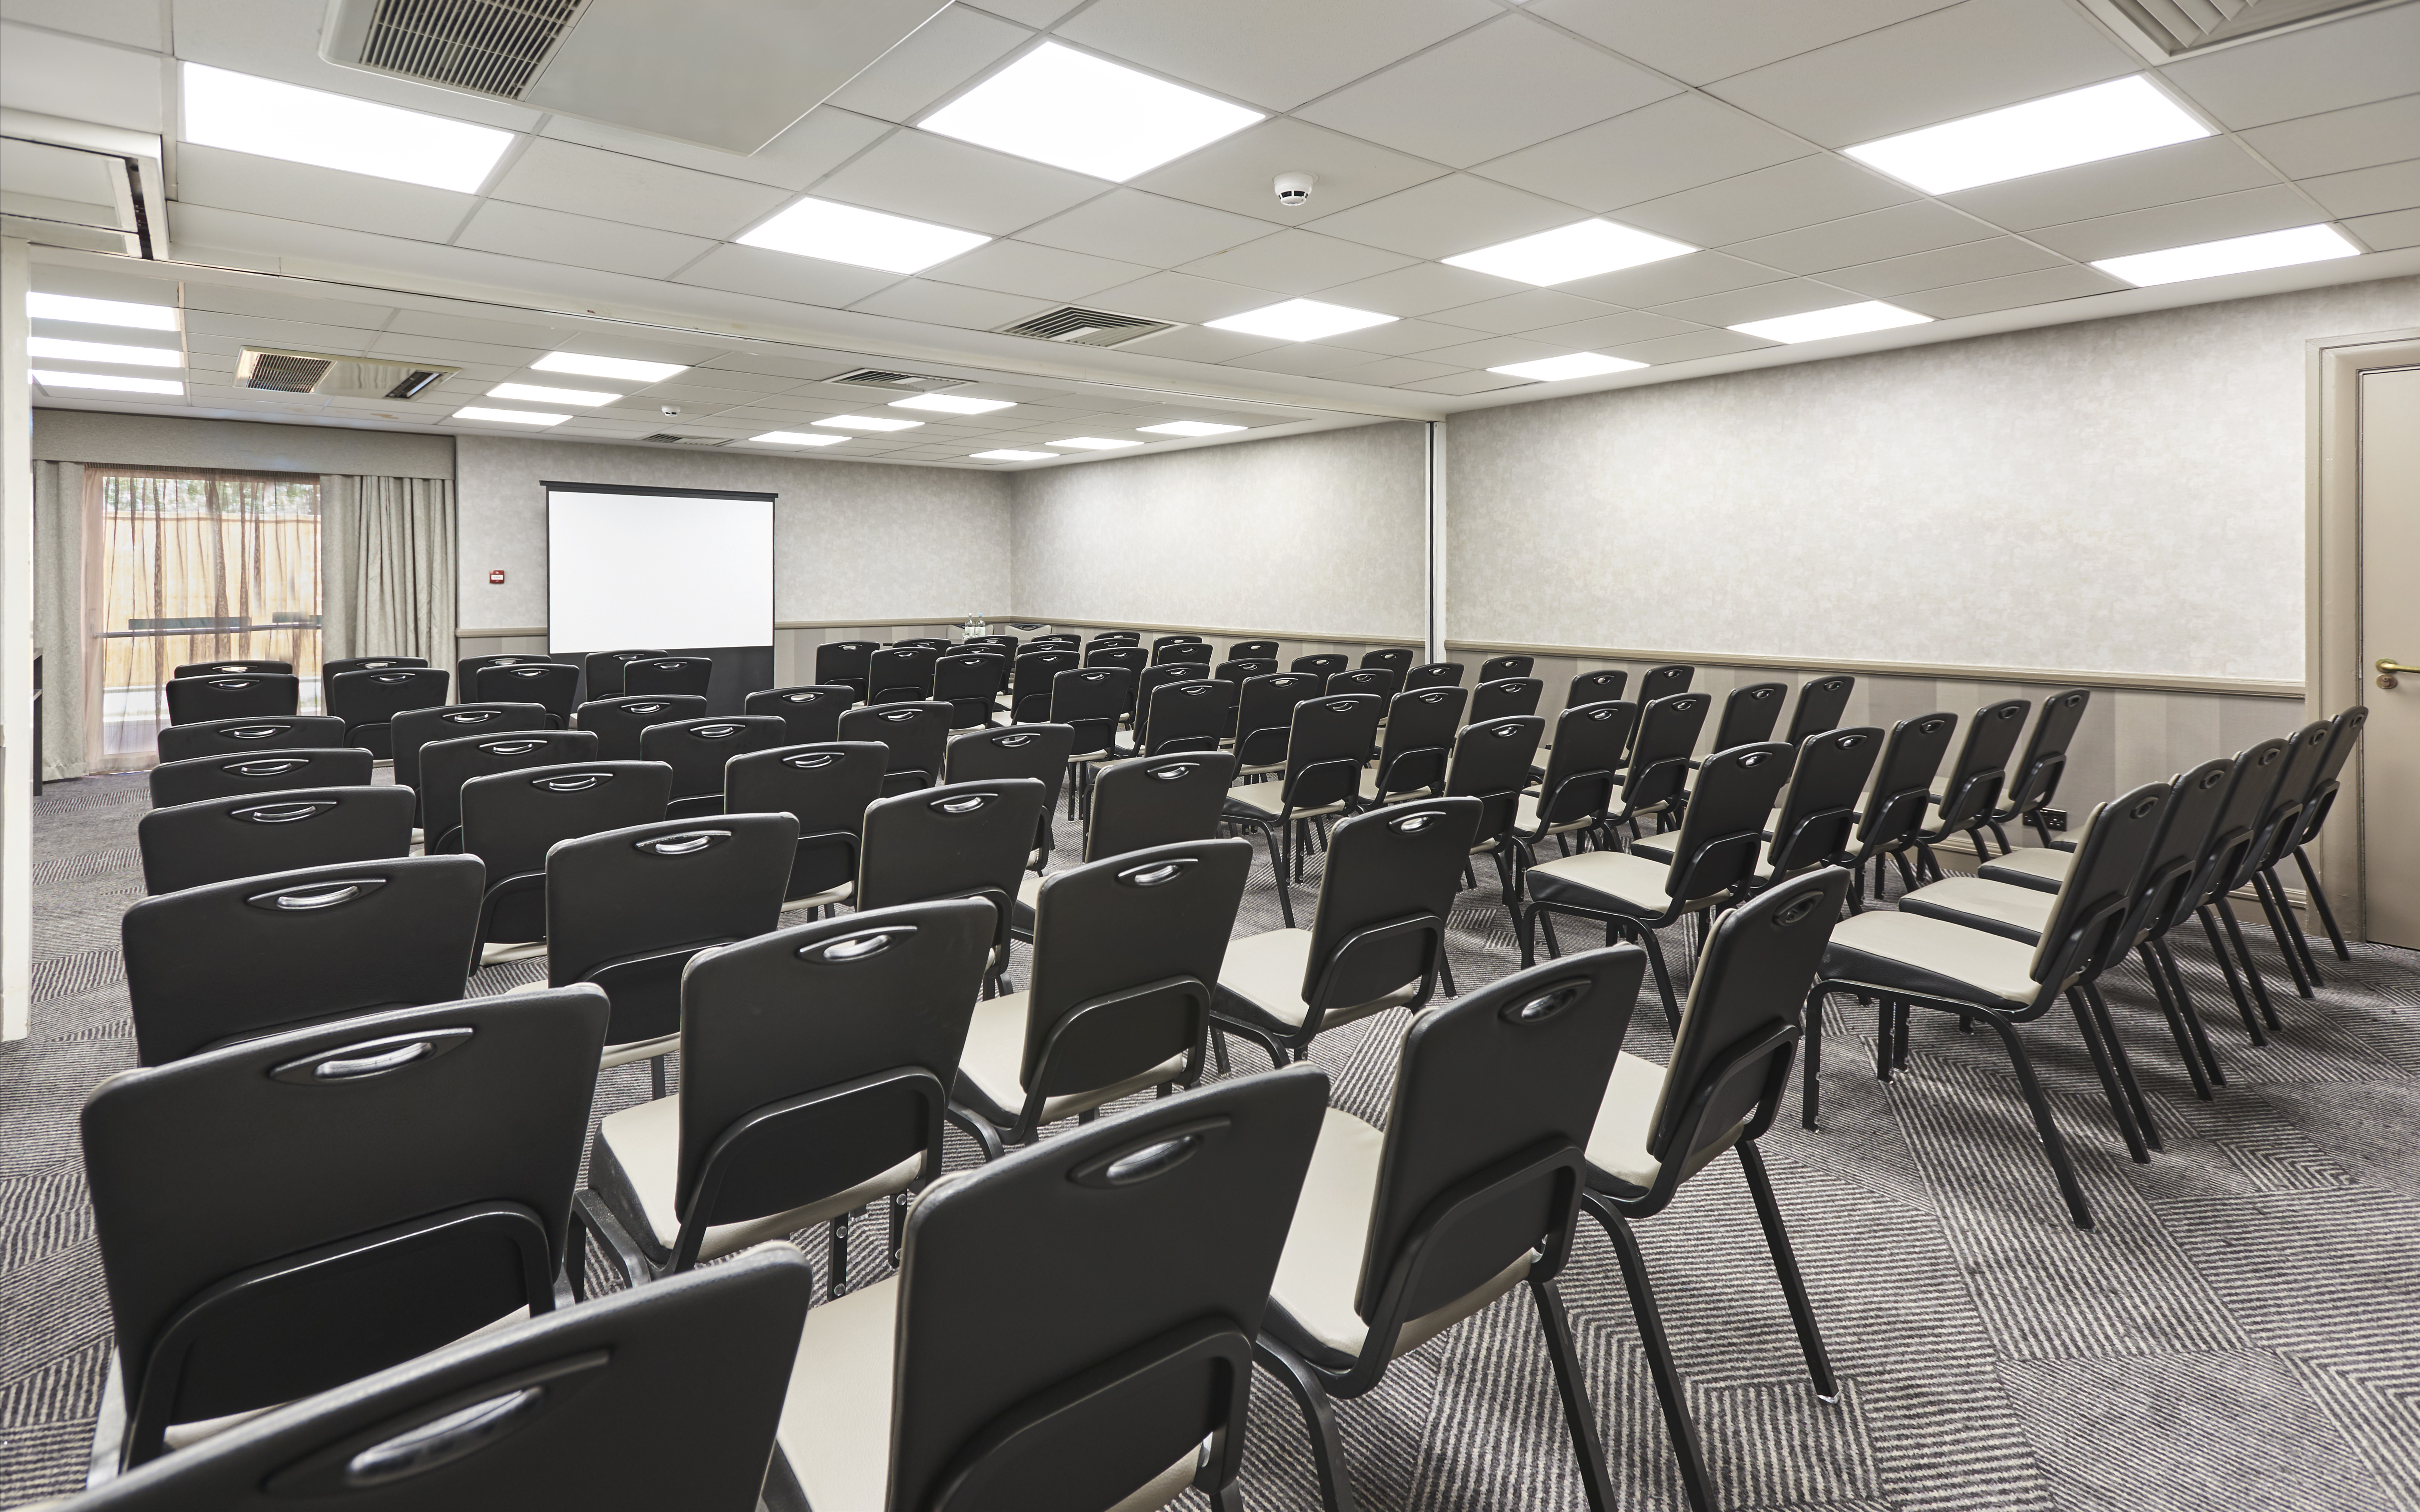 Enbourne Suite Arranged Theater Style With Rows of Chairs Facing Projector Screen and Window With Sheer Drapes